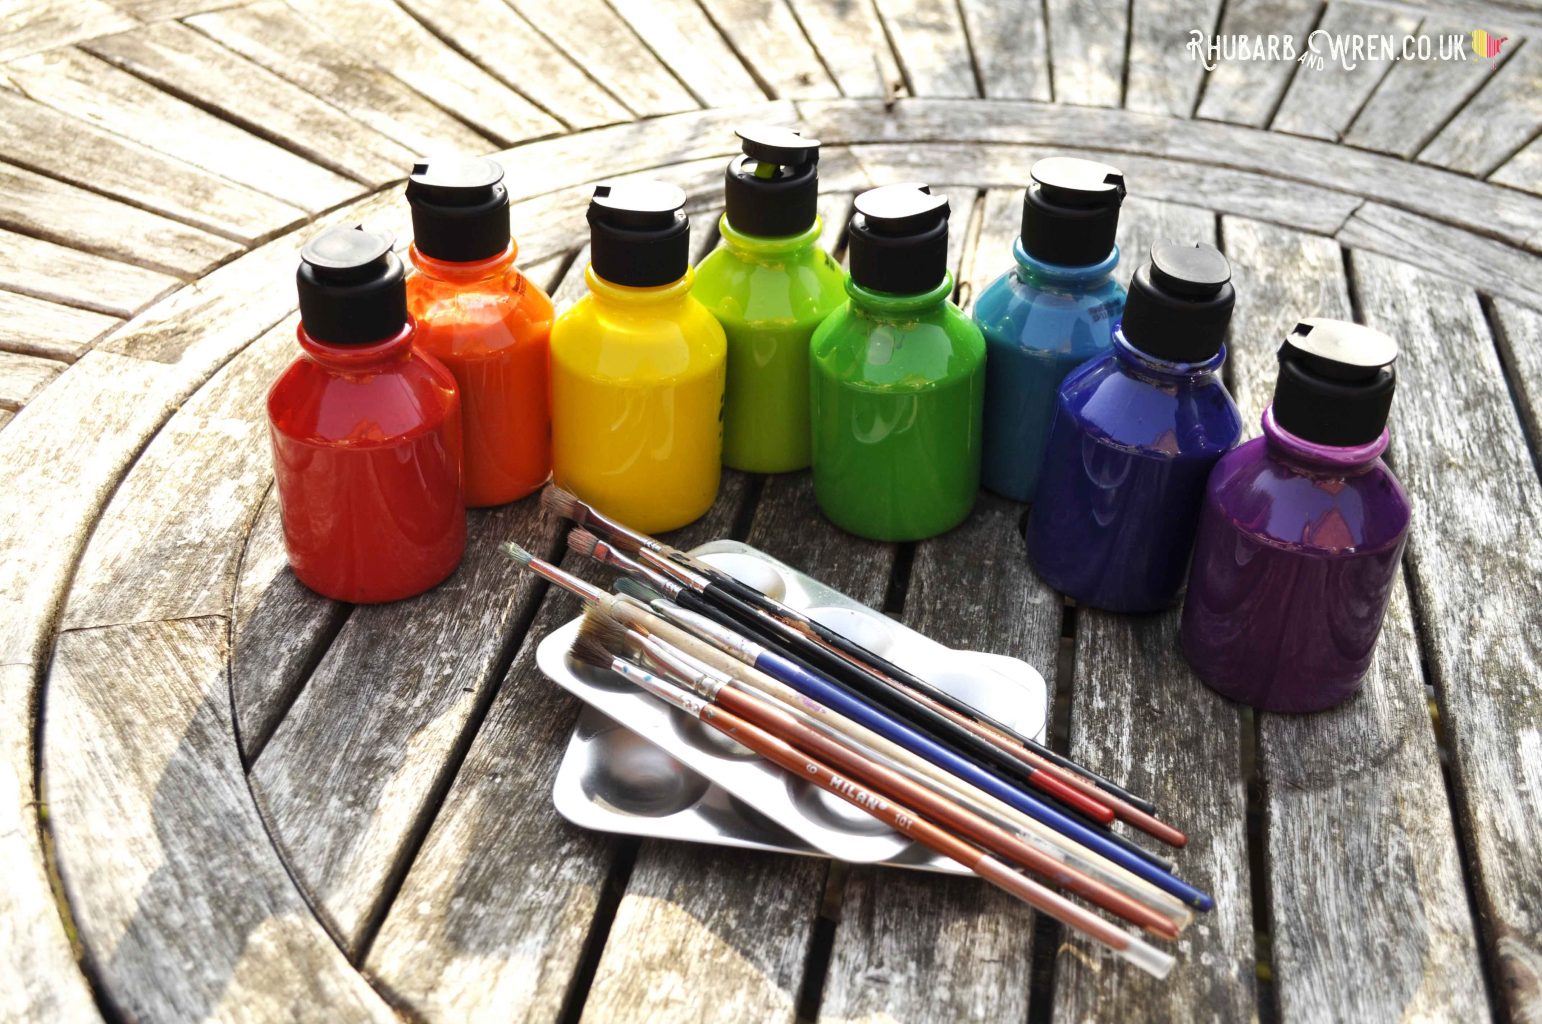 Rainbow shades of paint for decorating a DIY magic wand